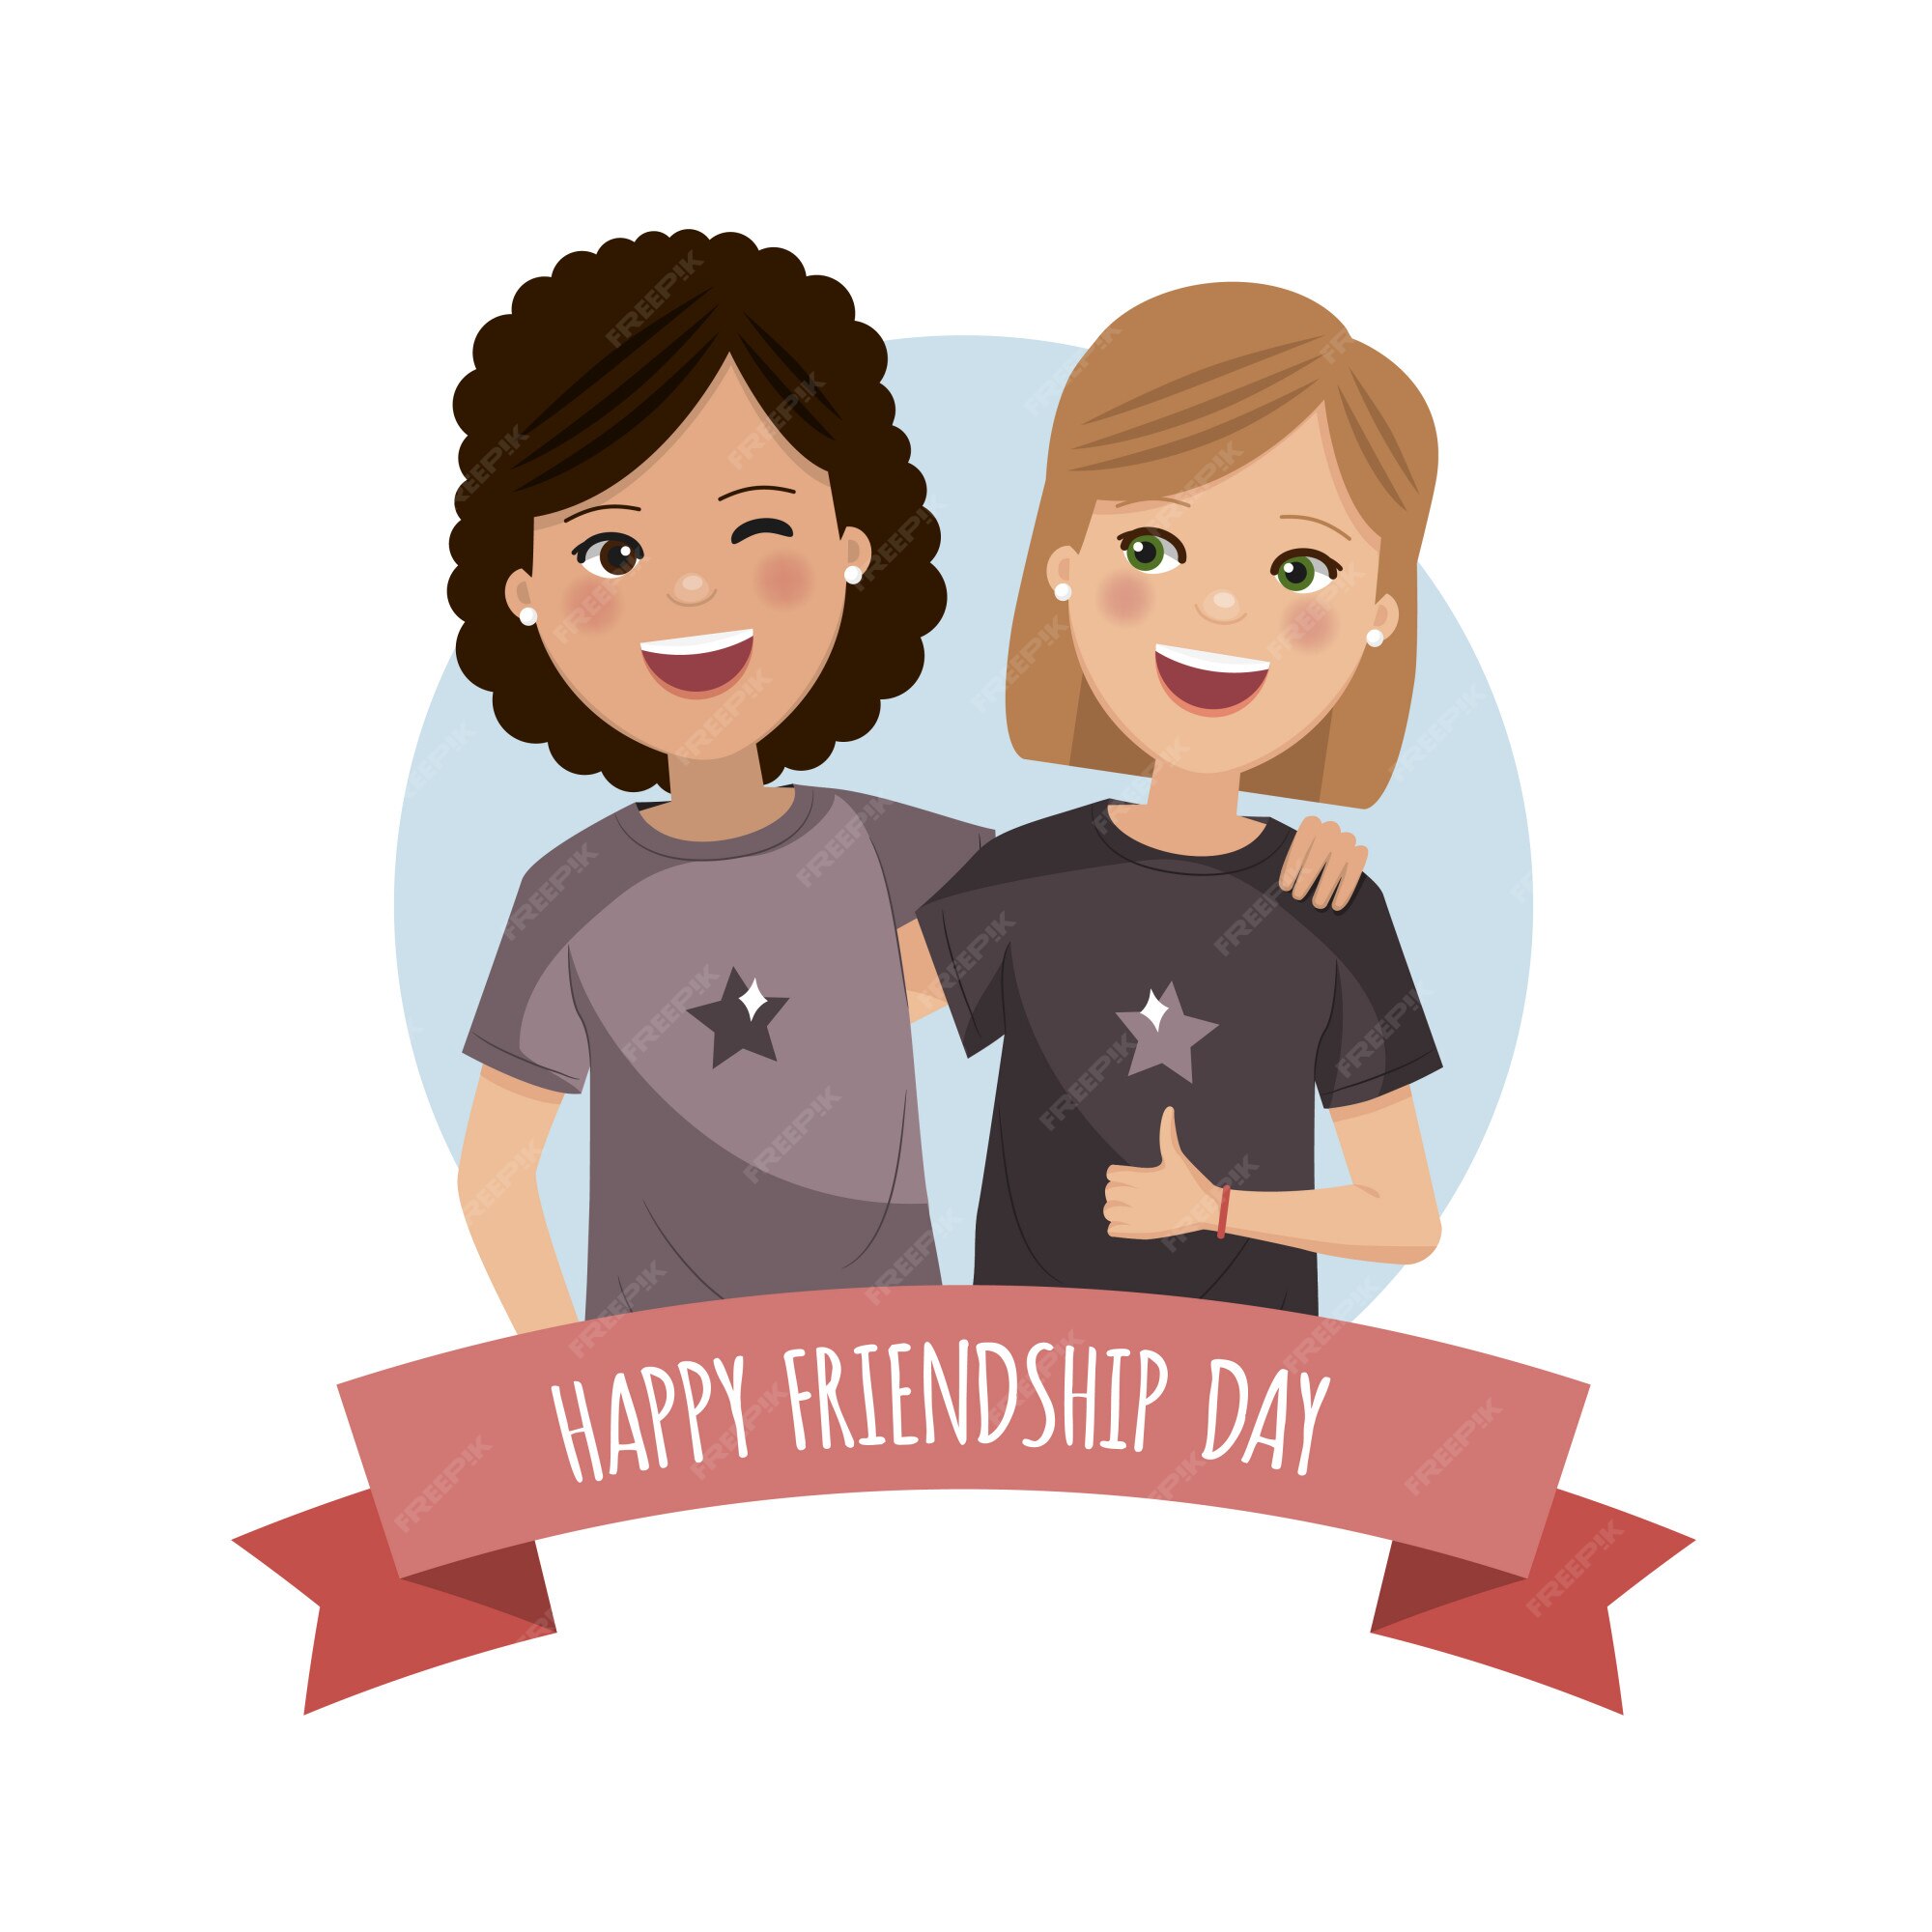 Premium Vector | Two girls on the friendship day. united friends forever.